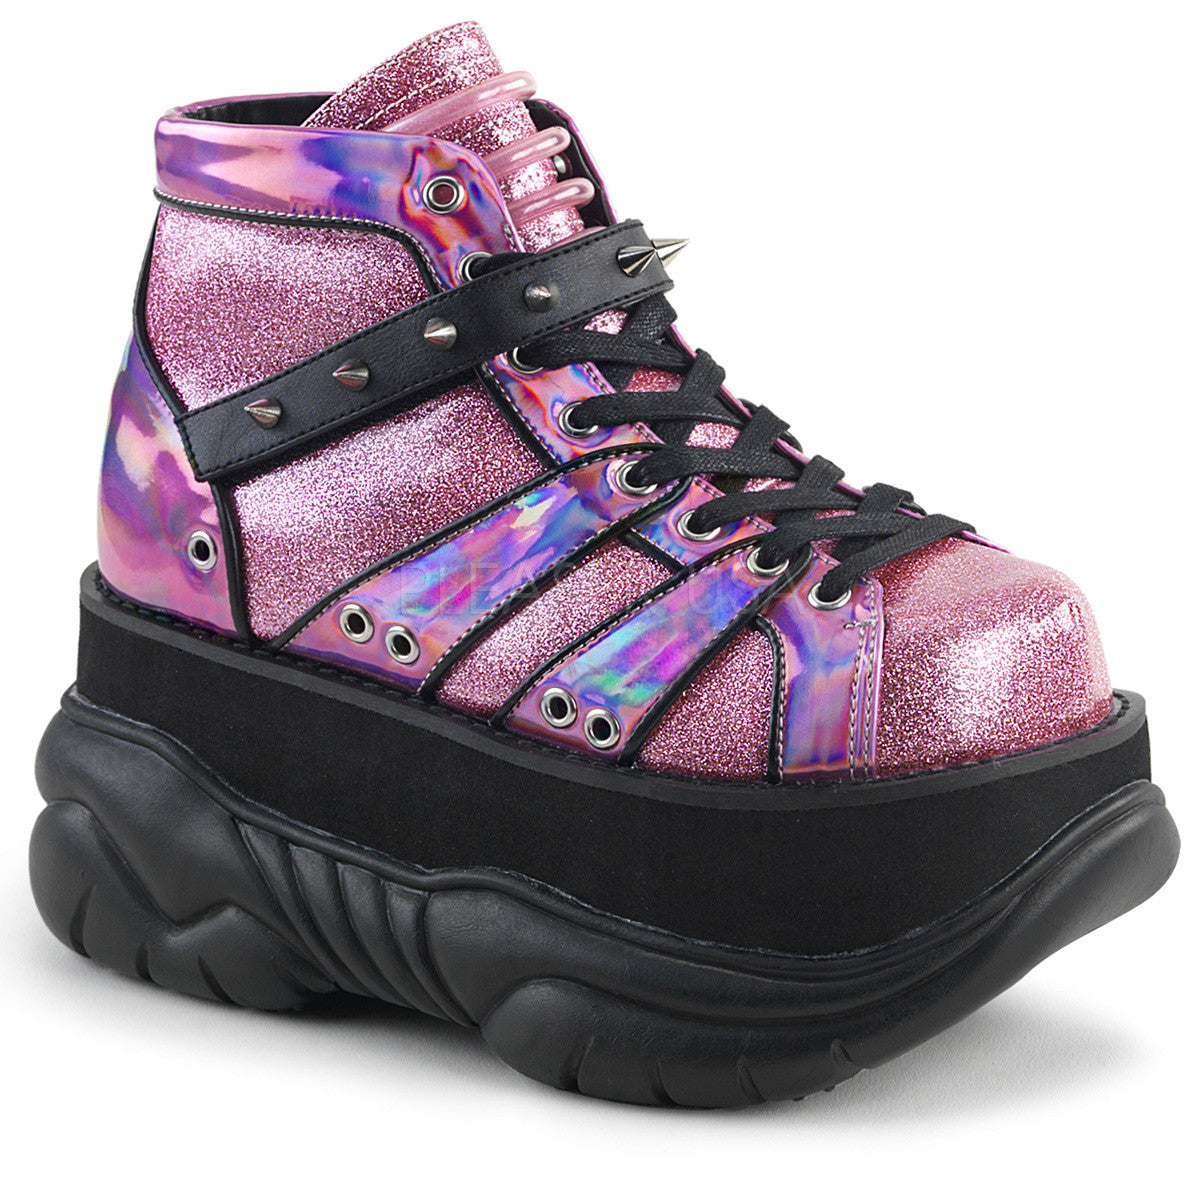 3 Platform Pink Glitter Goth Shoes With UV Tubing